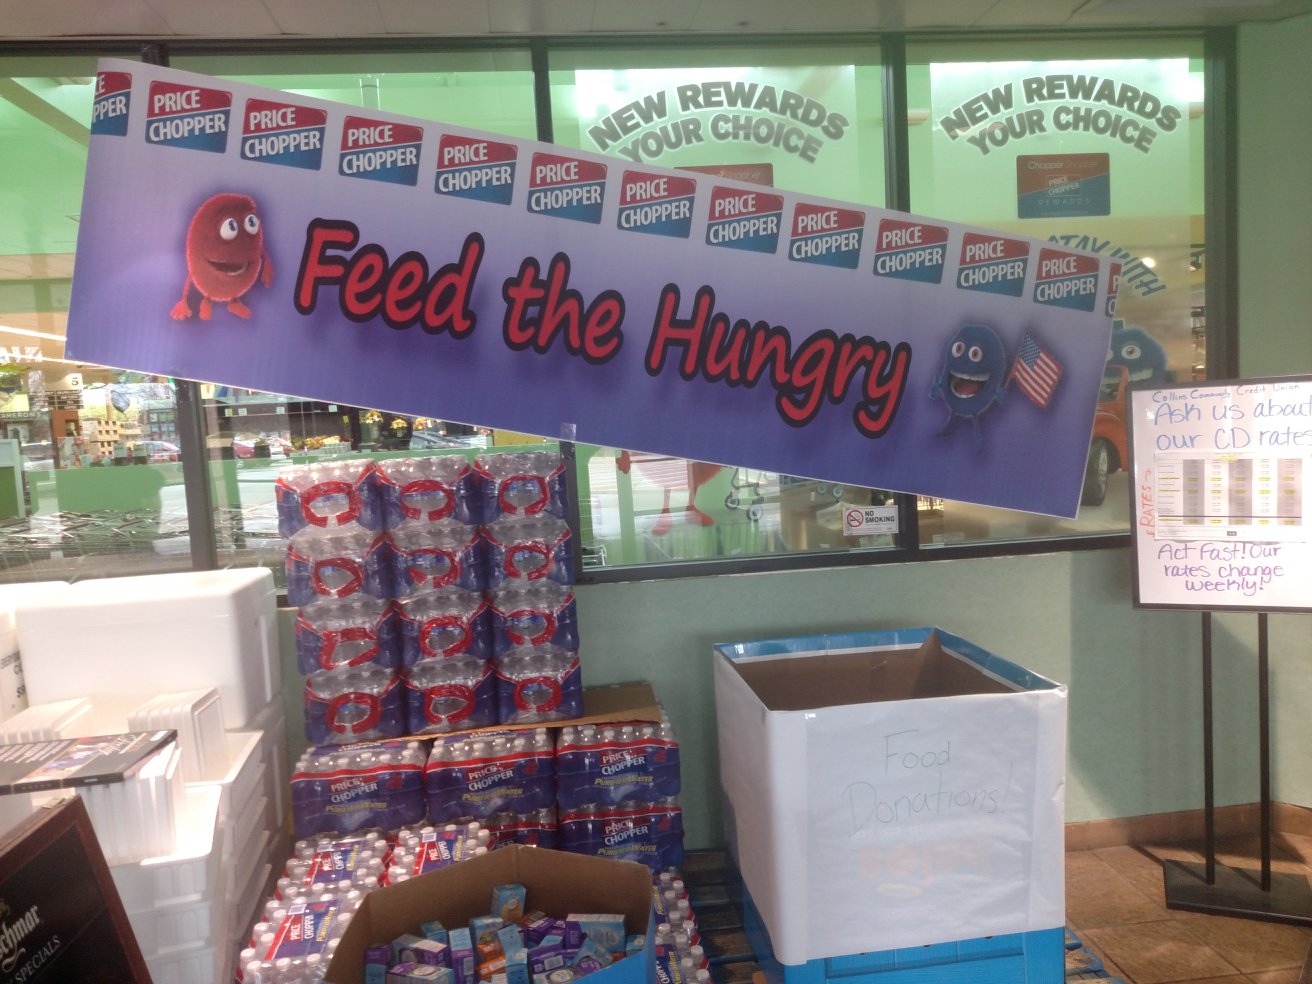 Price Chopper - Feed The Hungry